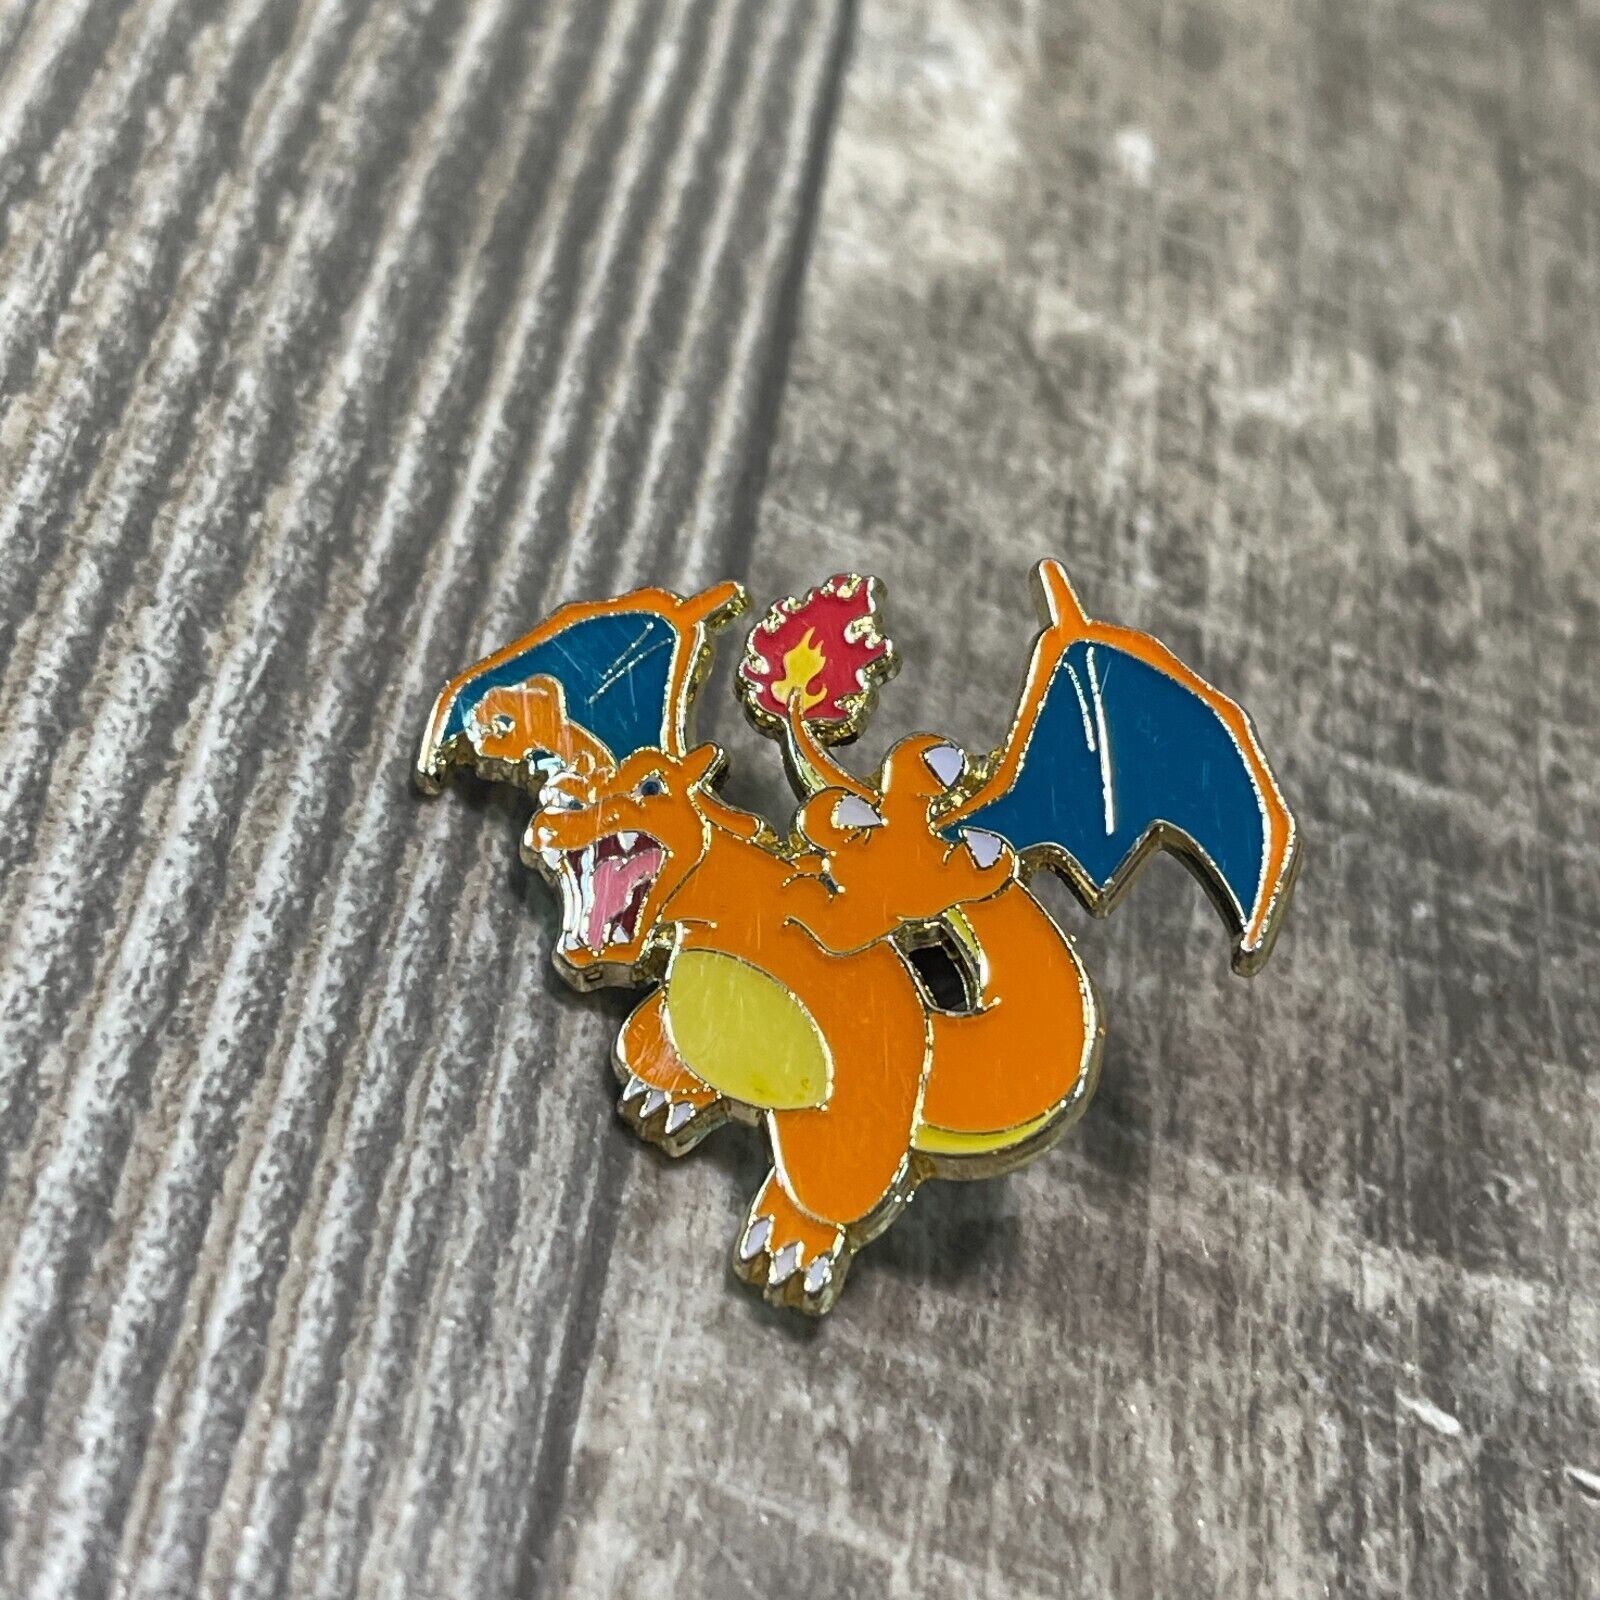 Primary image for Charizard Enamel Pin Official Pokemon TCG Collectible Lapel Badge Brooch